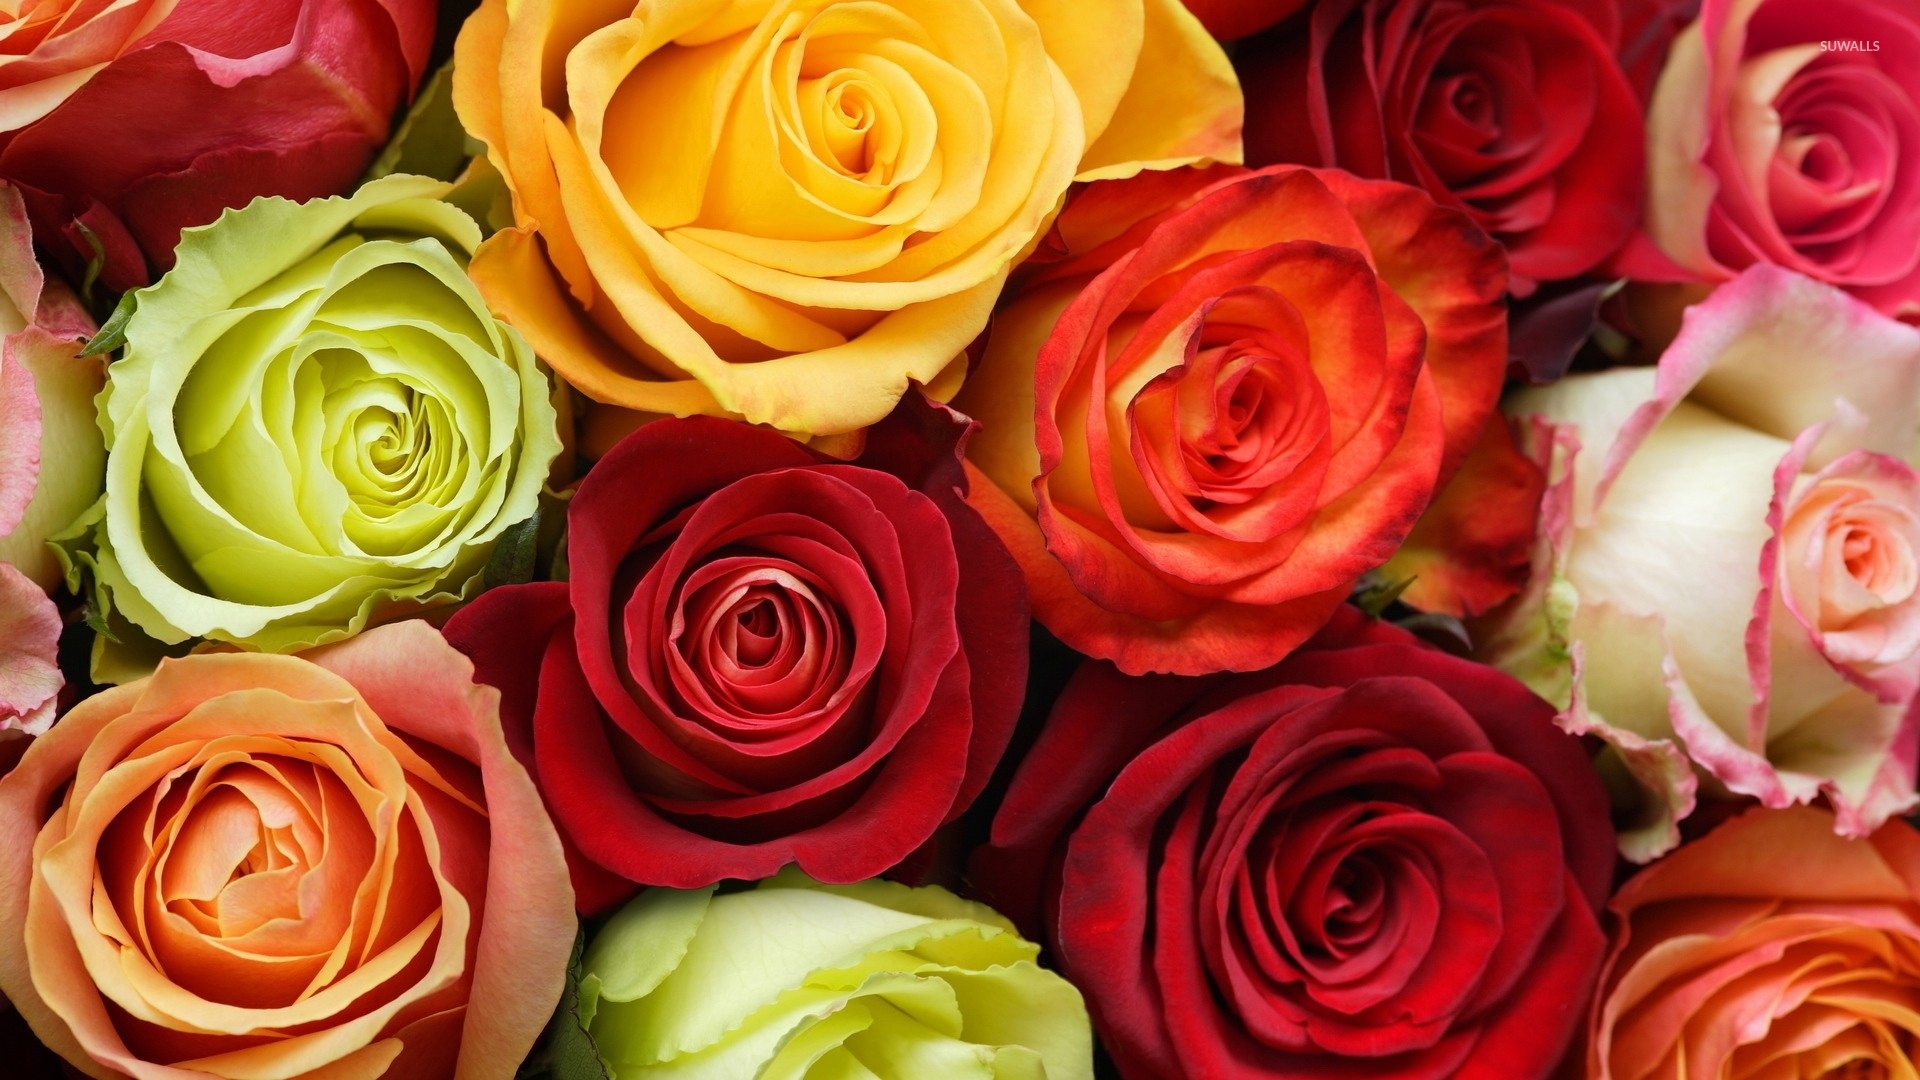 Colorful roses wallpaper - Flower wallpapers - #50584